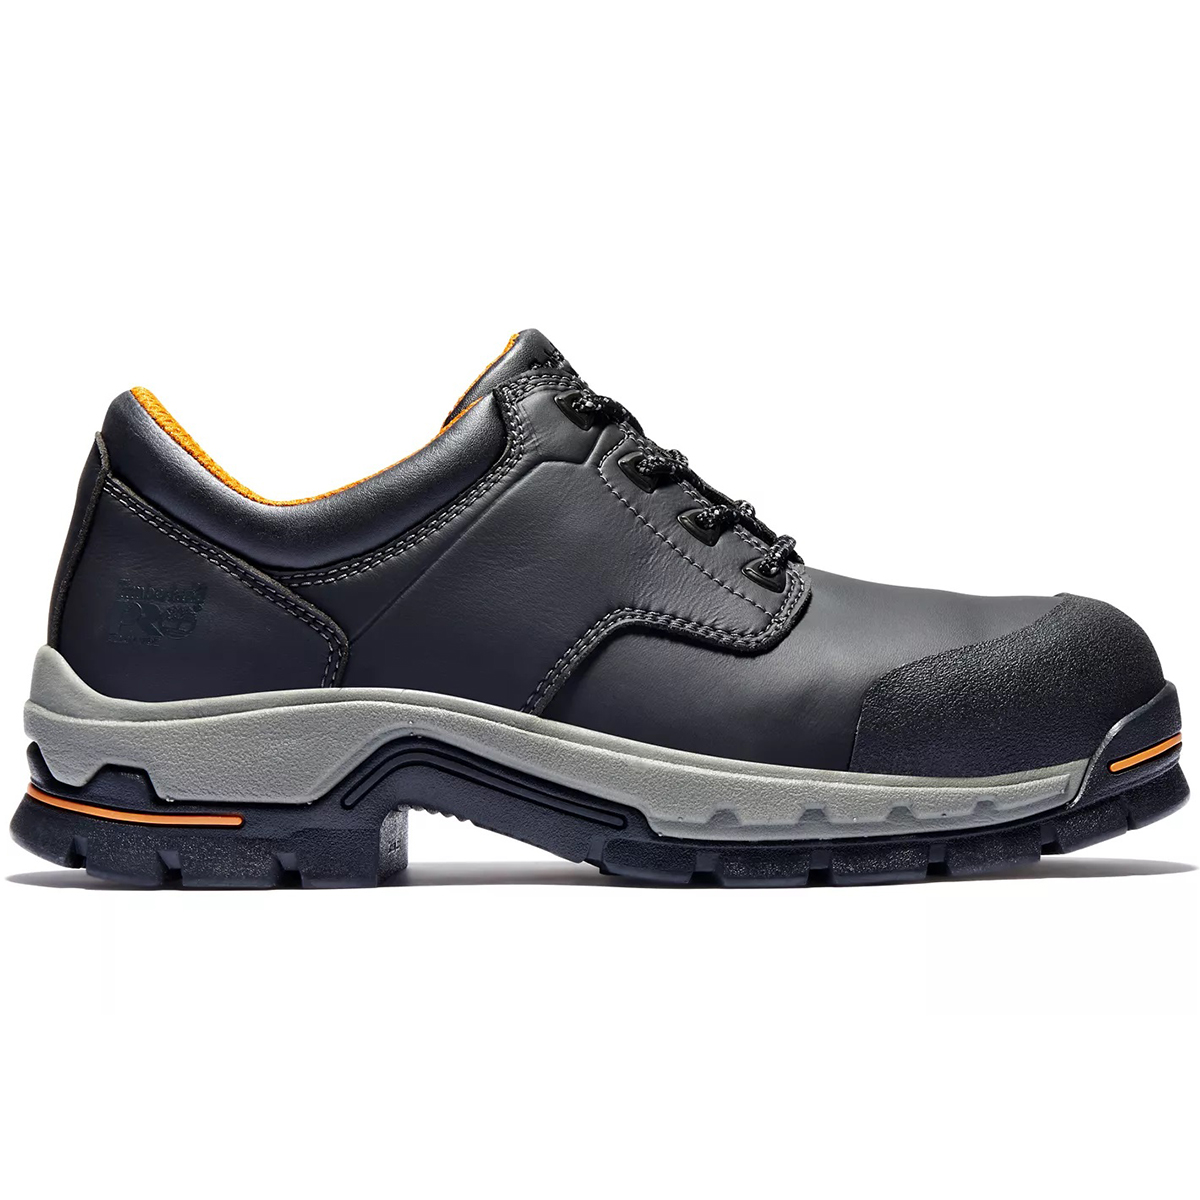 Timberland Pro Men's Stockdale Alloy Toe Work Shoes